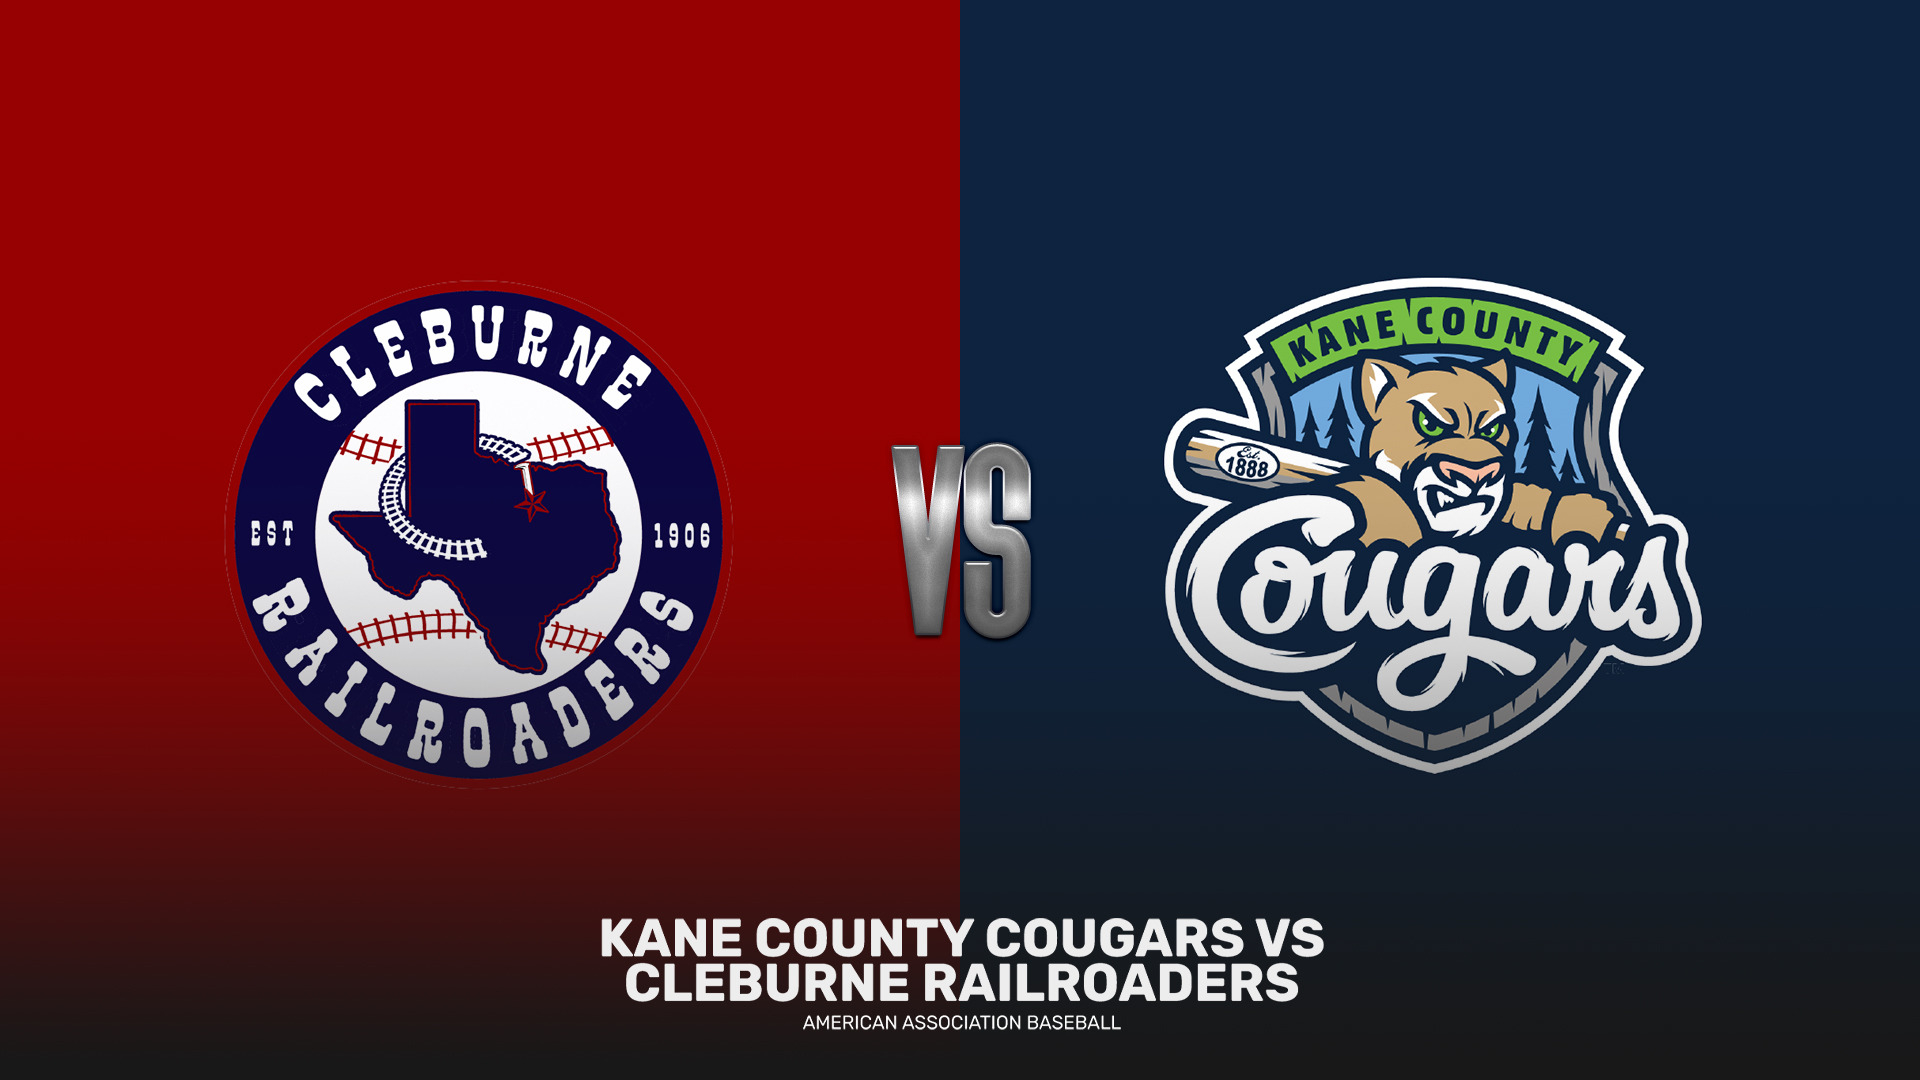 American Association, Cleburne Railroaders release schedule for